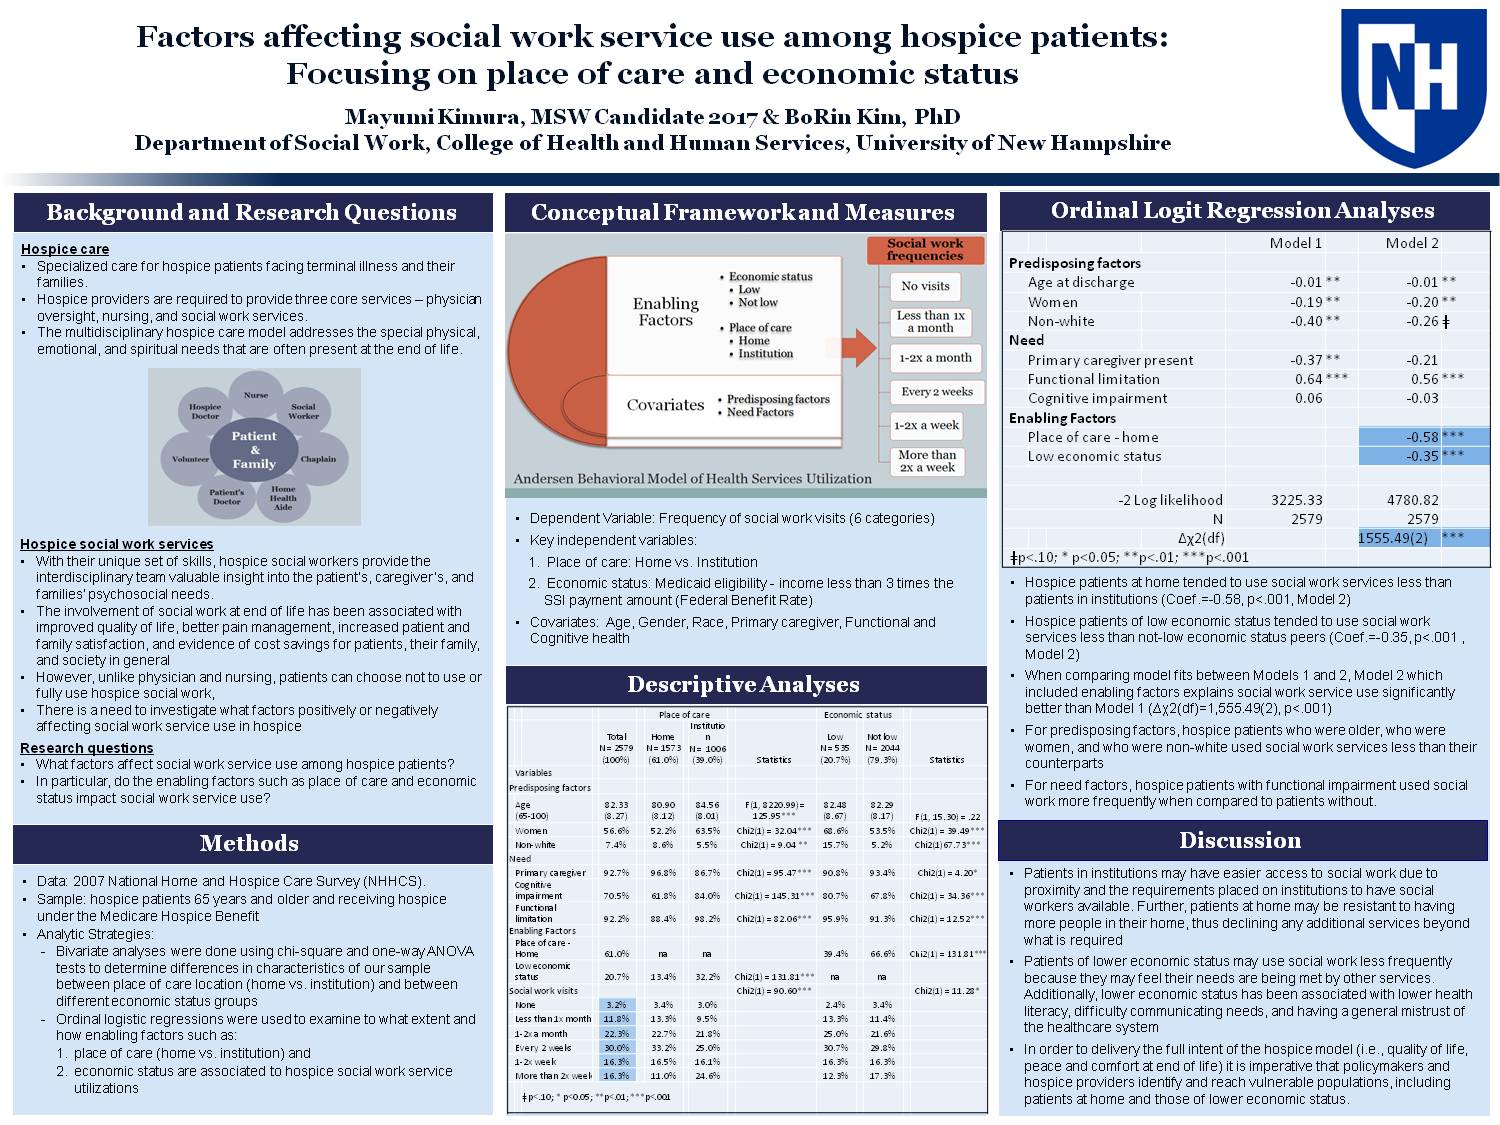 Factors Affecting Social Work Service Use Among Hospice Patients:  Focusing On Place Of Care And Economic Status by mayumimk